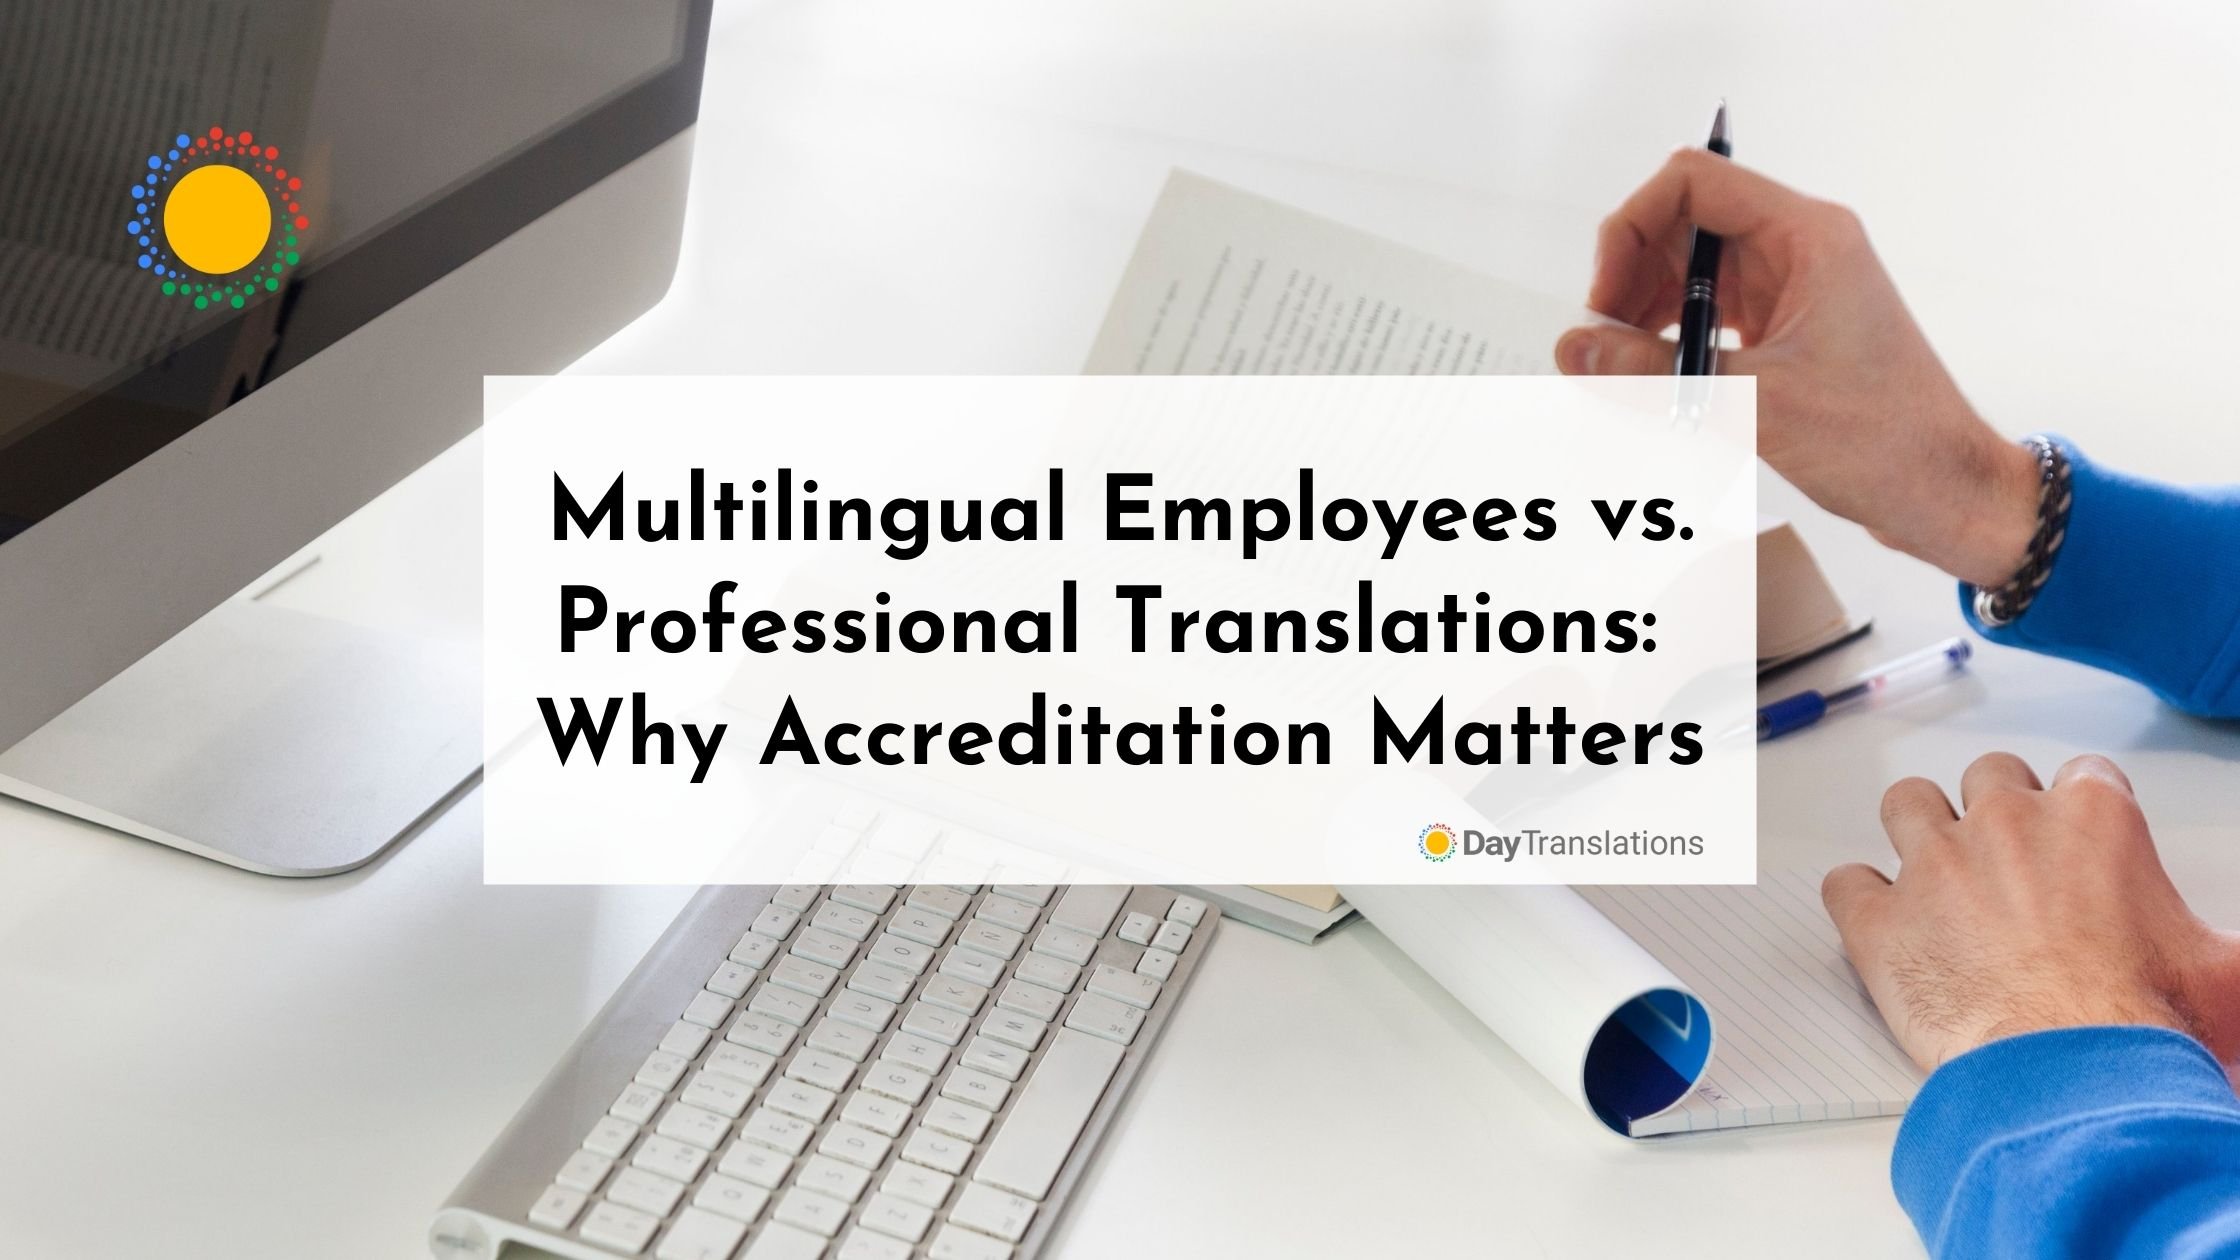 Multilingual Employees vs. Professional Translations: Why Accreditation Matters